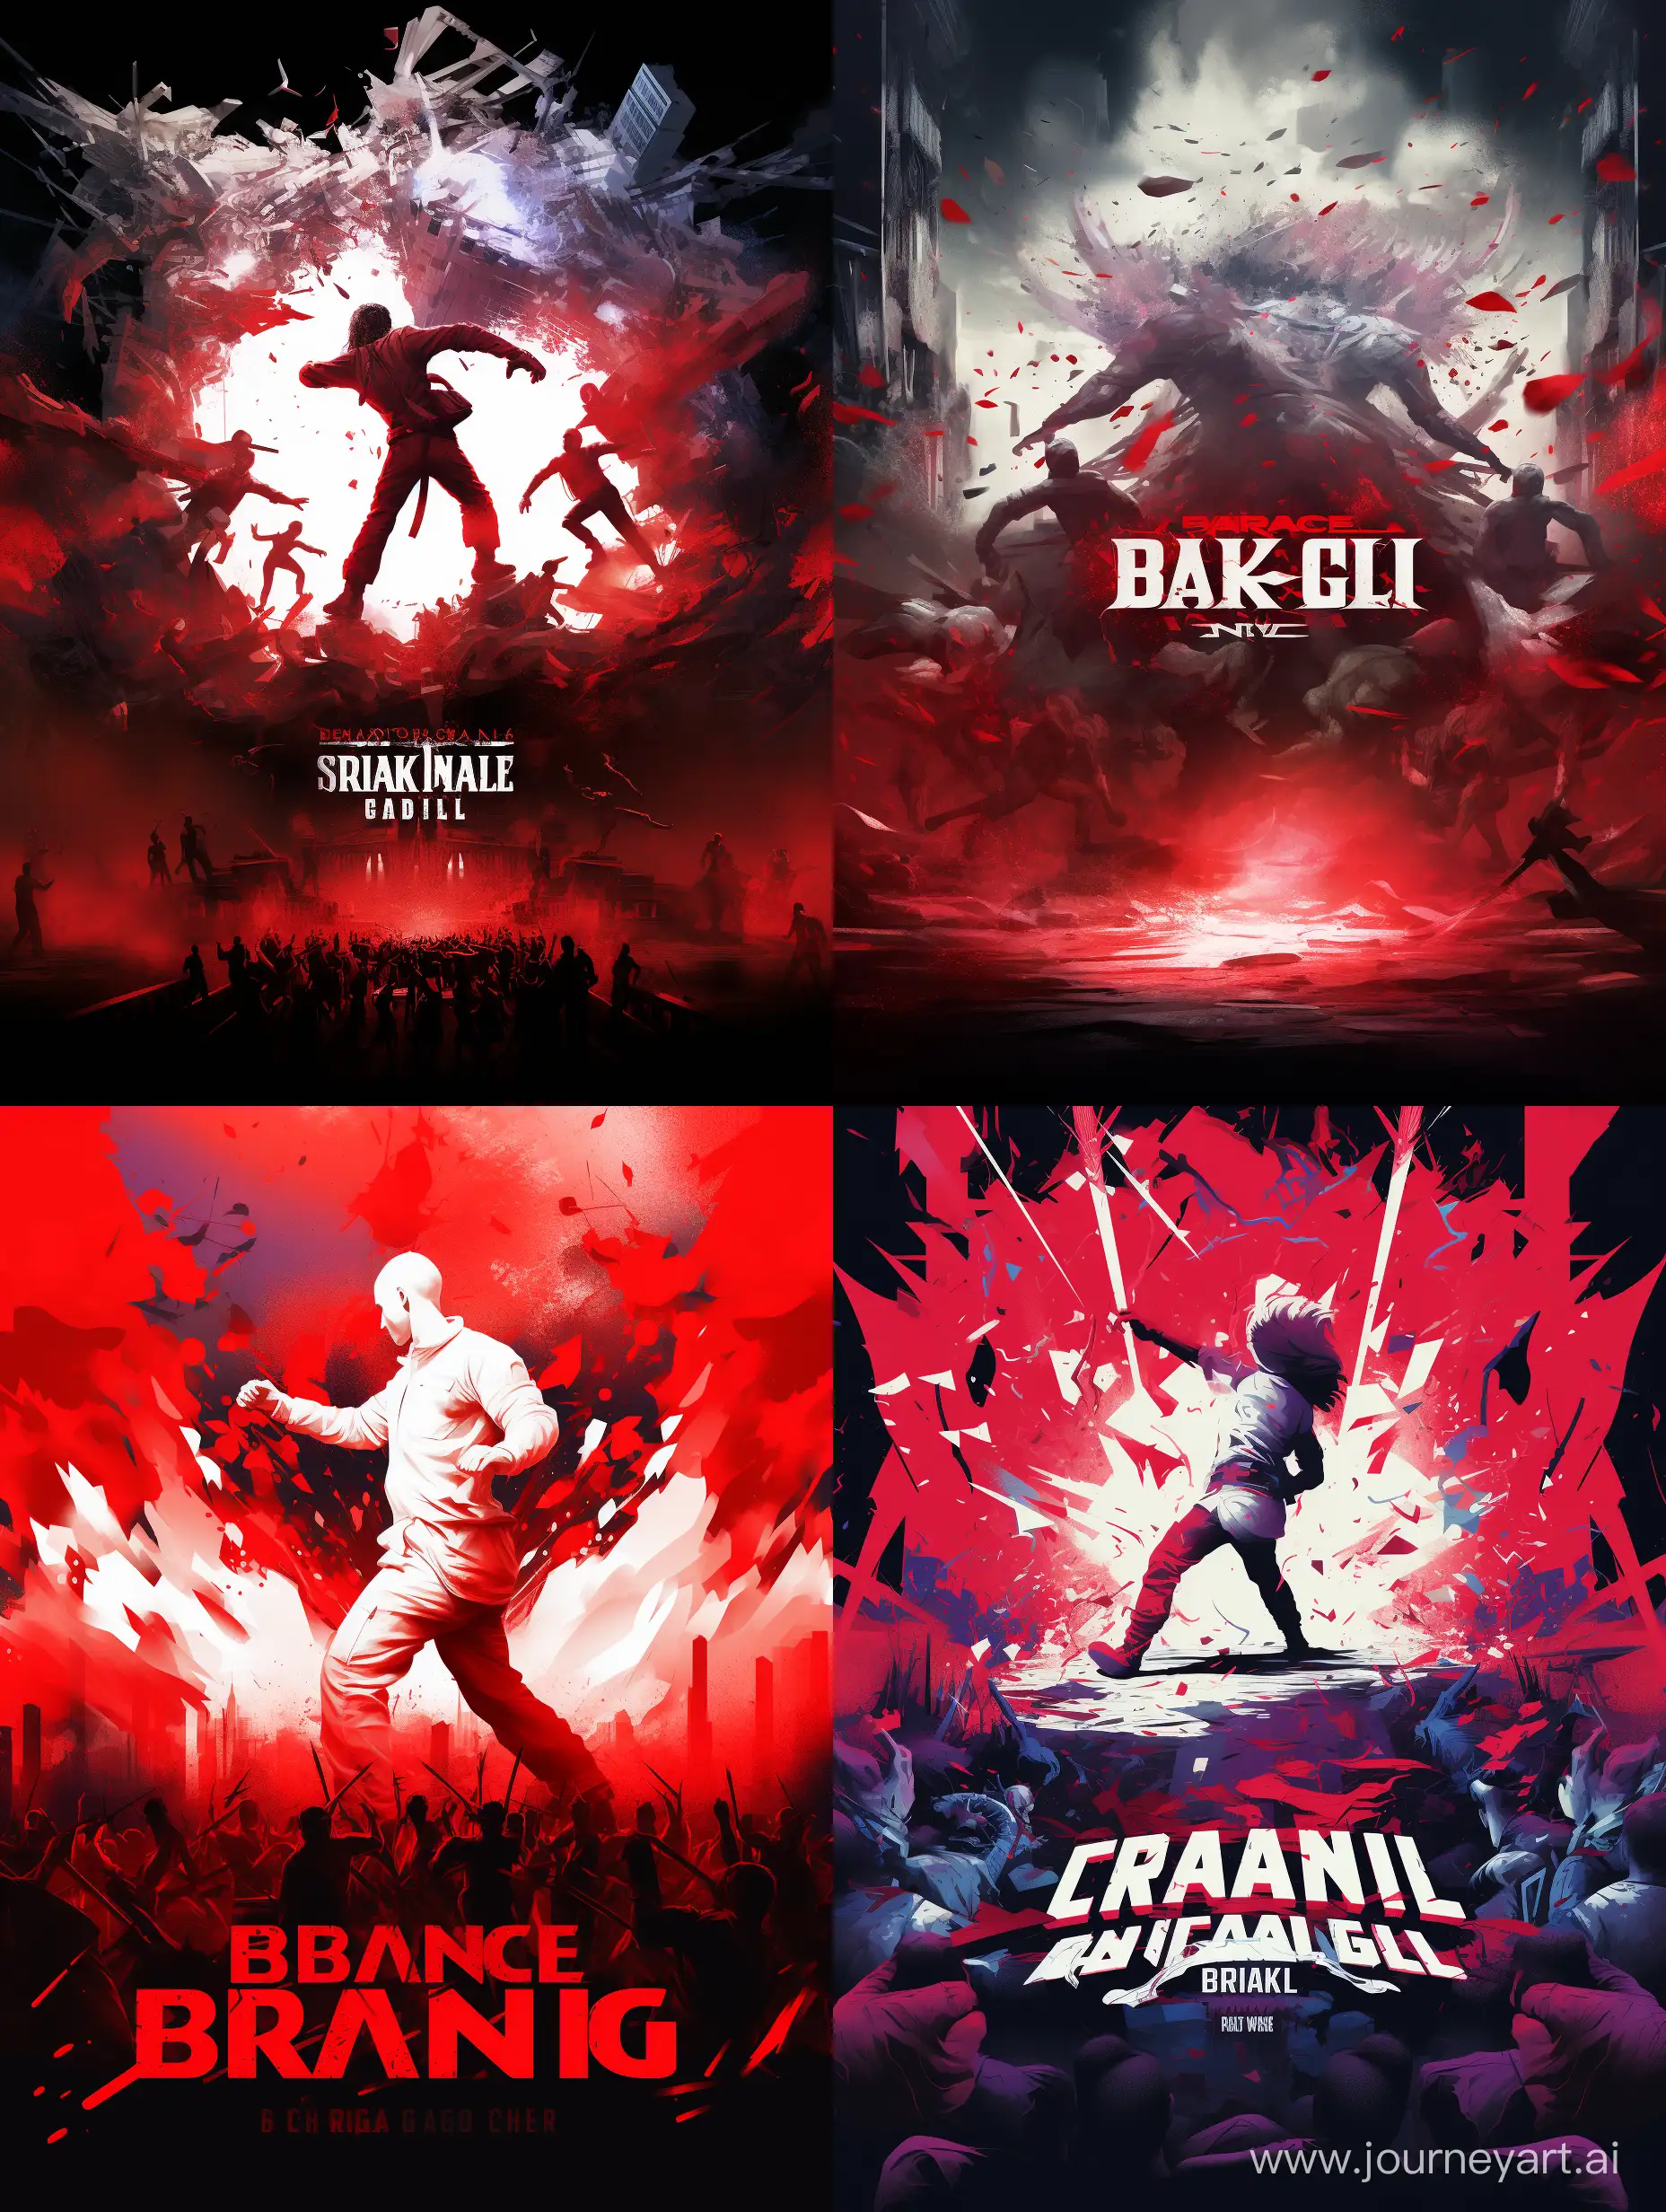 I need art to make a flyer, based on the Breaking combat event, with a vibrant audience, light show game effects, a stage waiting for a great battle of breaking dance bboys and bgirls. Use white and red colors for effects.